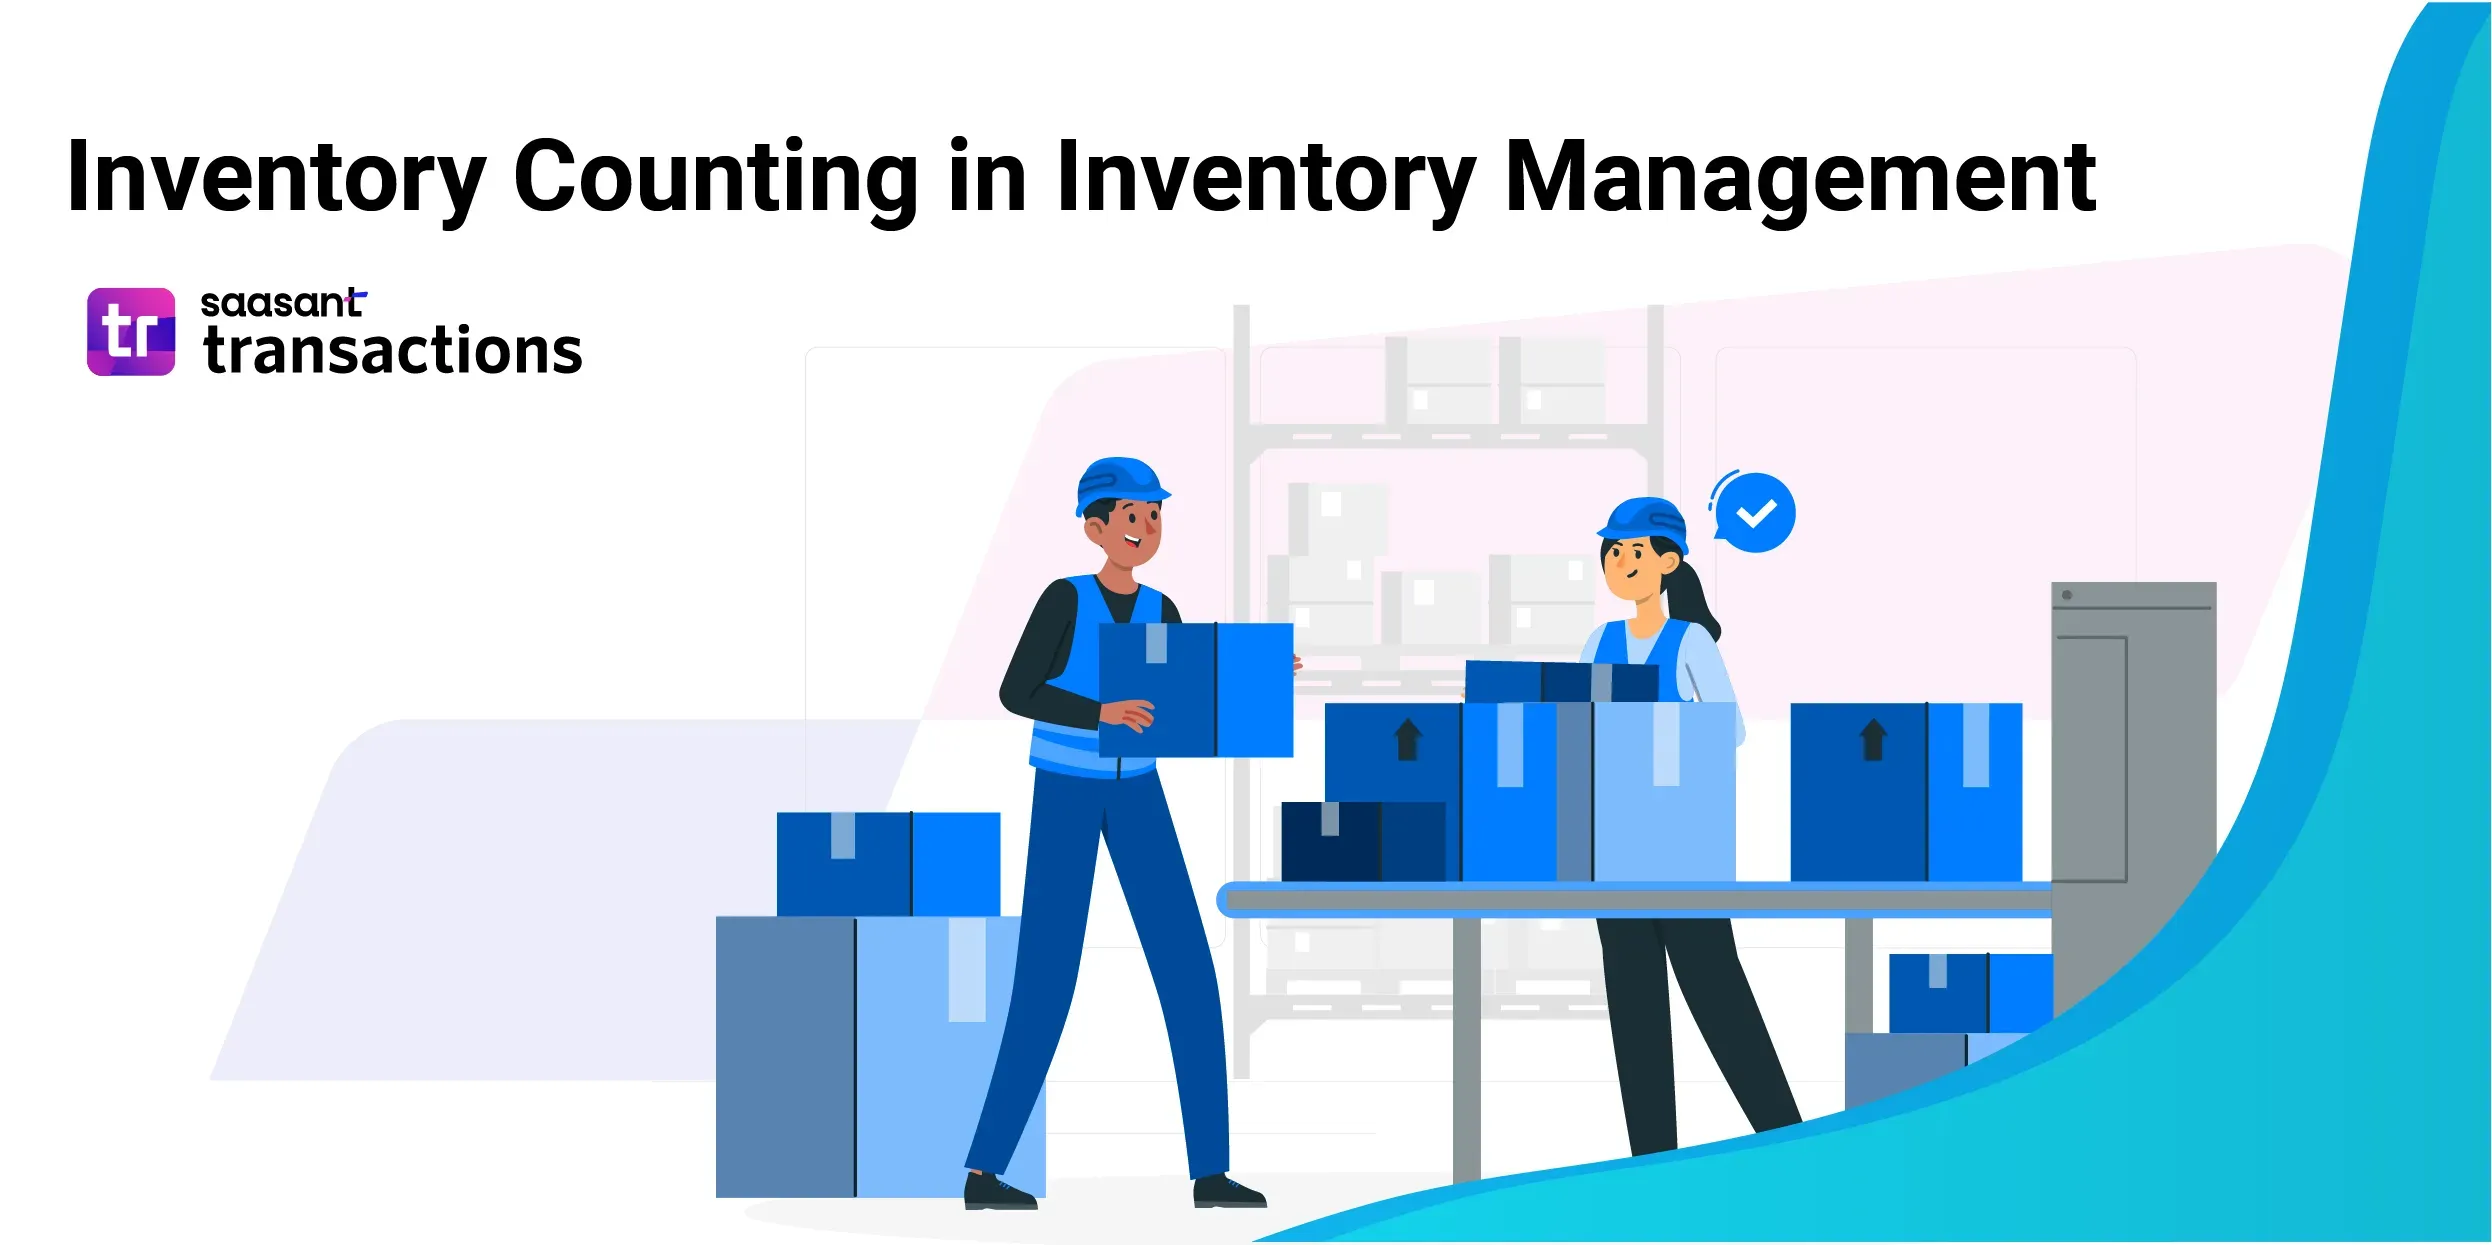 Benefits of Inventory Counting: A Critical Part of Inventory Management